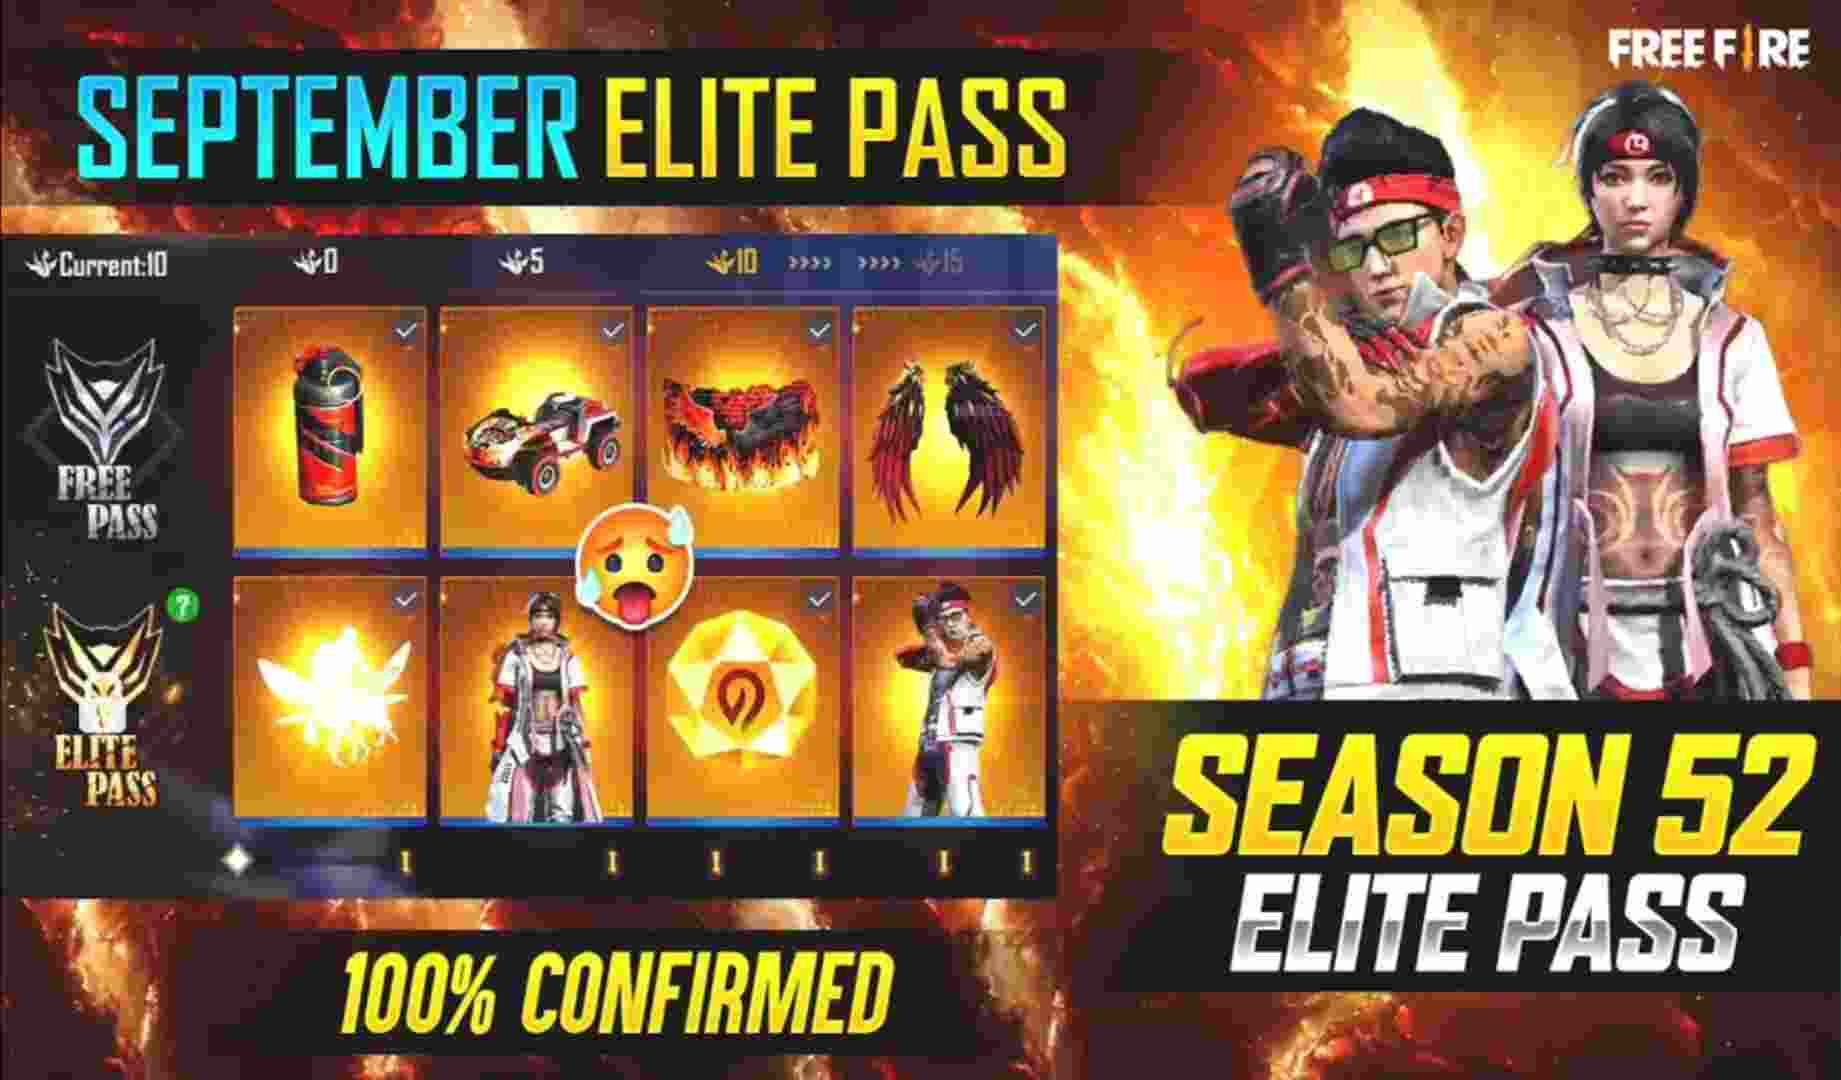 Free Fire New Upcoming Elite Pass In September 2022: Season 52 Release